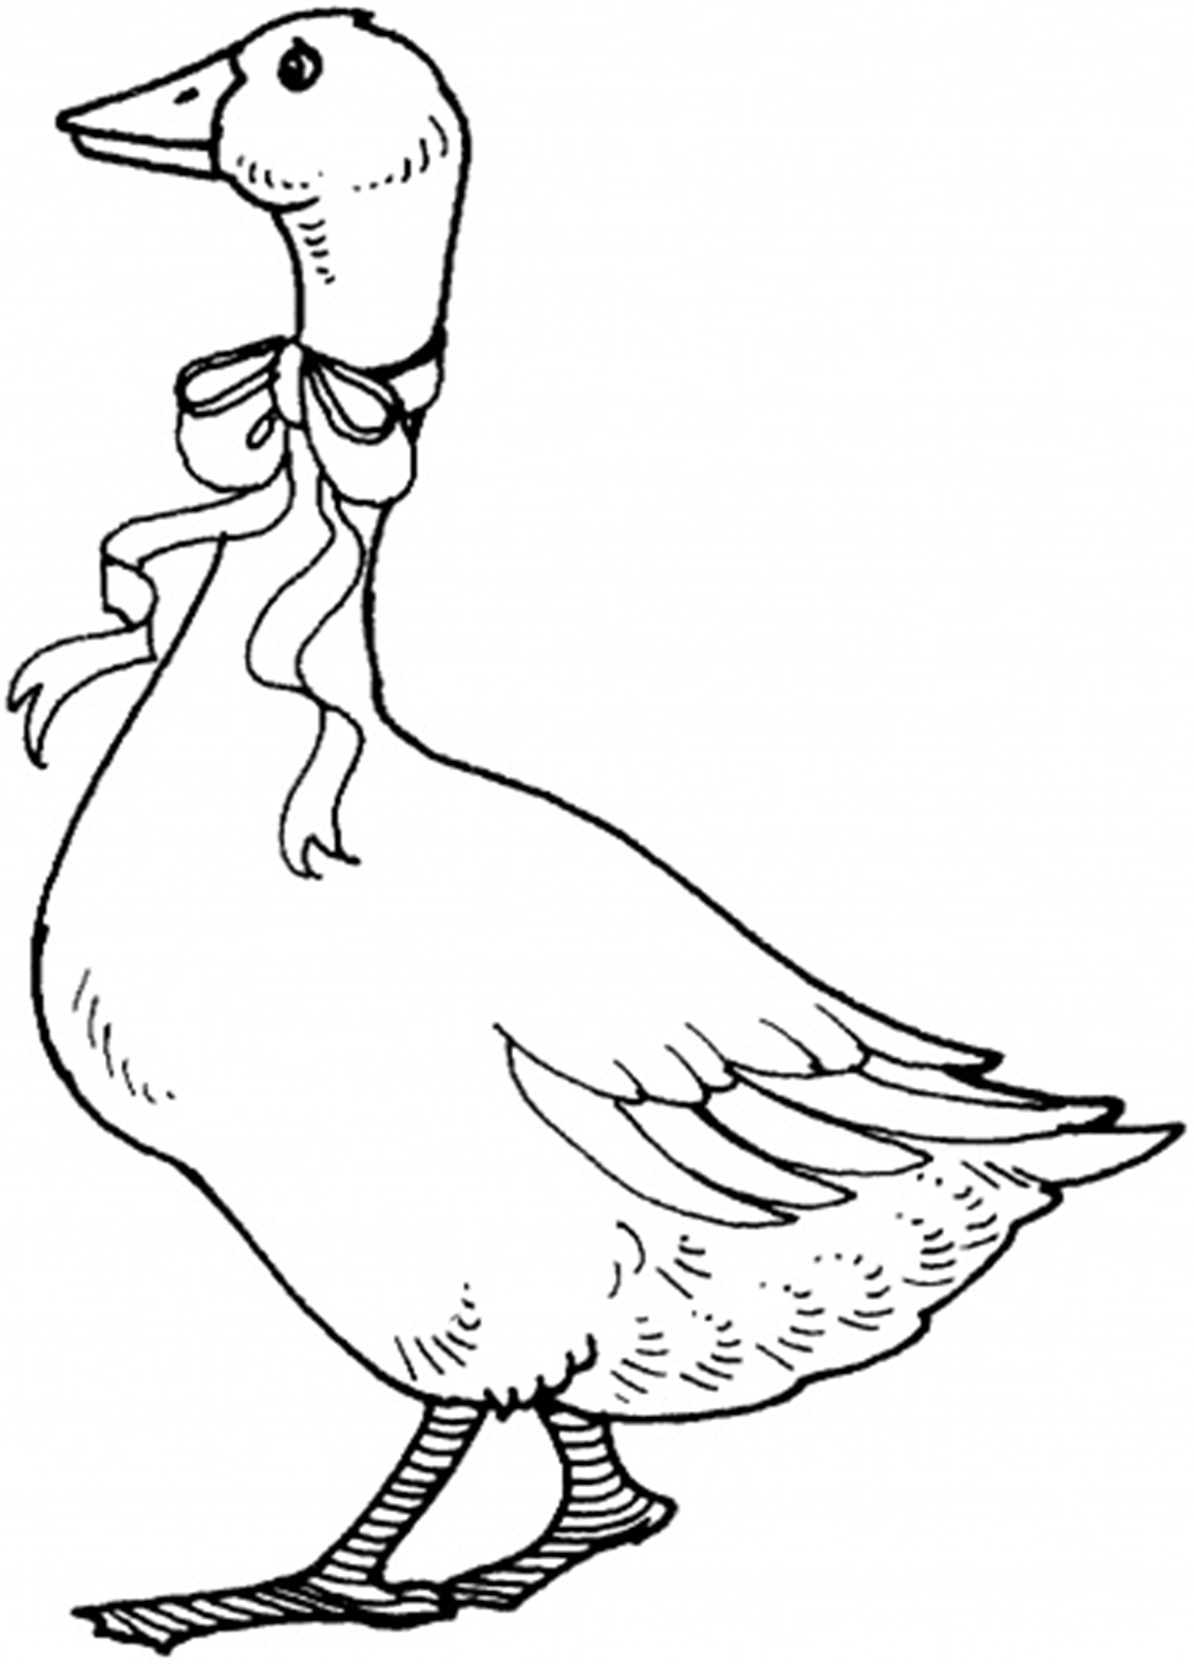 Goose With Ribbon Printable Animal S5f3c Coloring Page